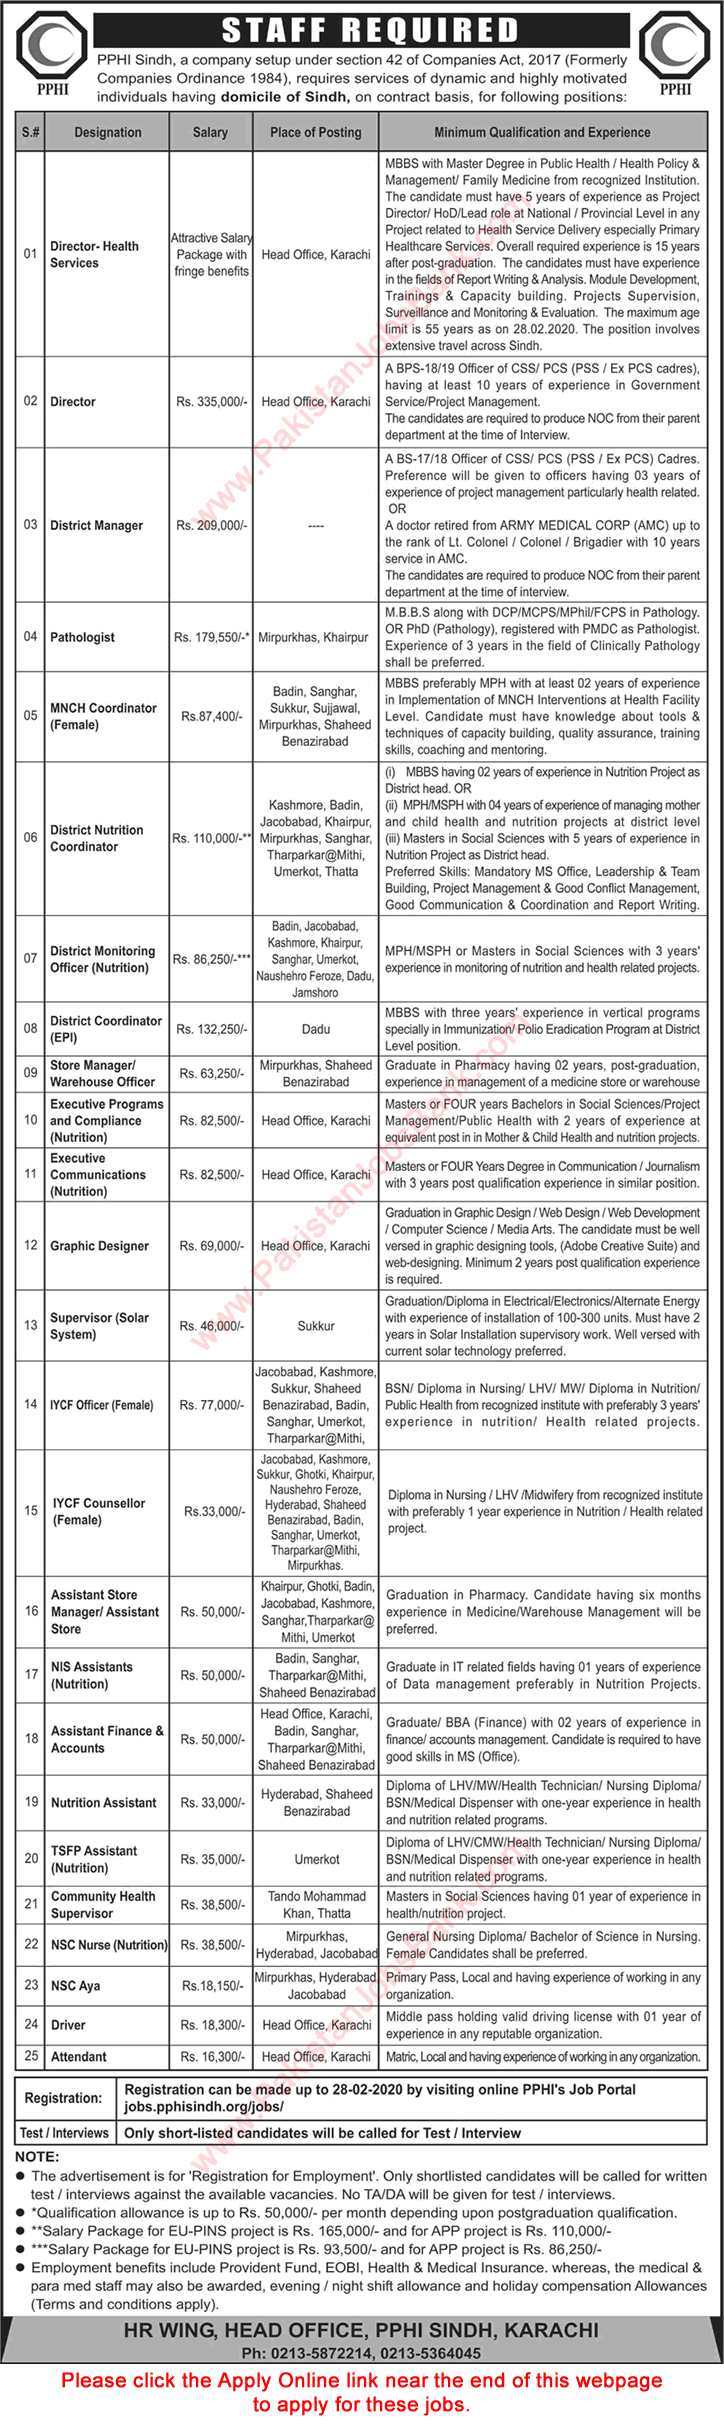 PPHI Sindh Jobs 2020 February Apply Online People's Primary Healthcare Initiative Latest